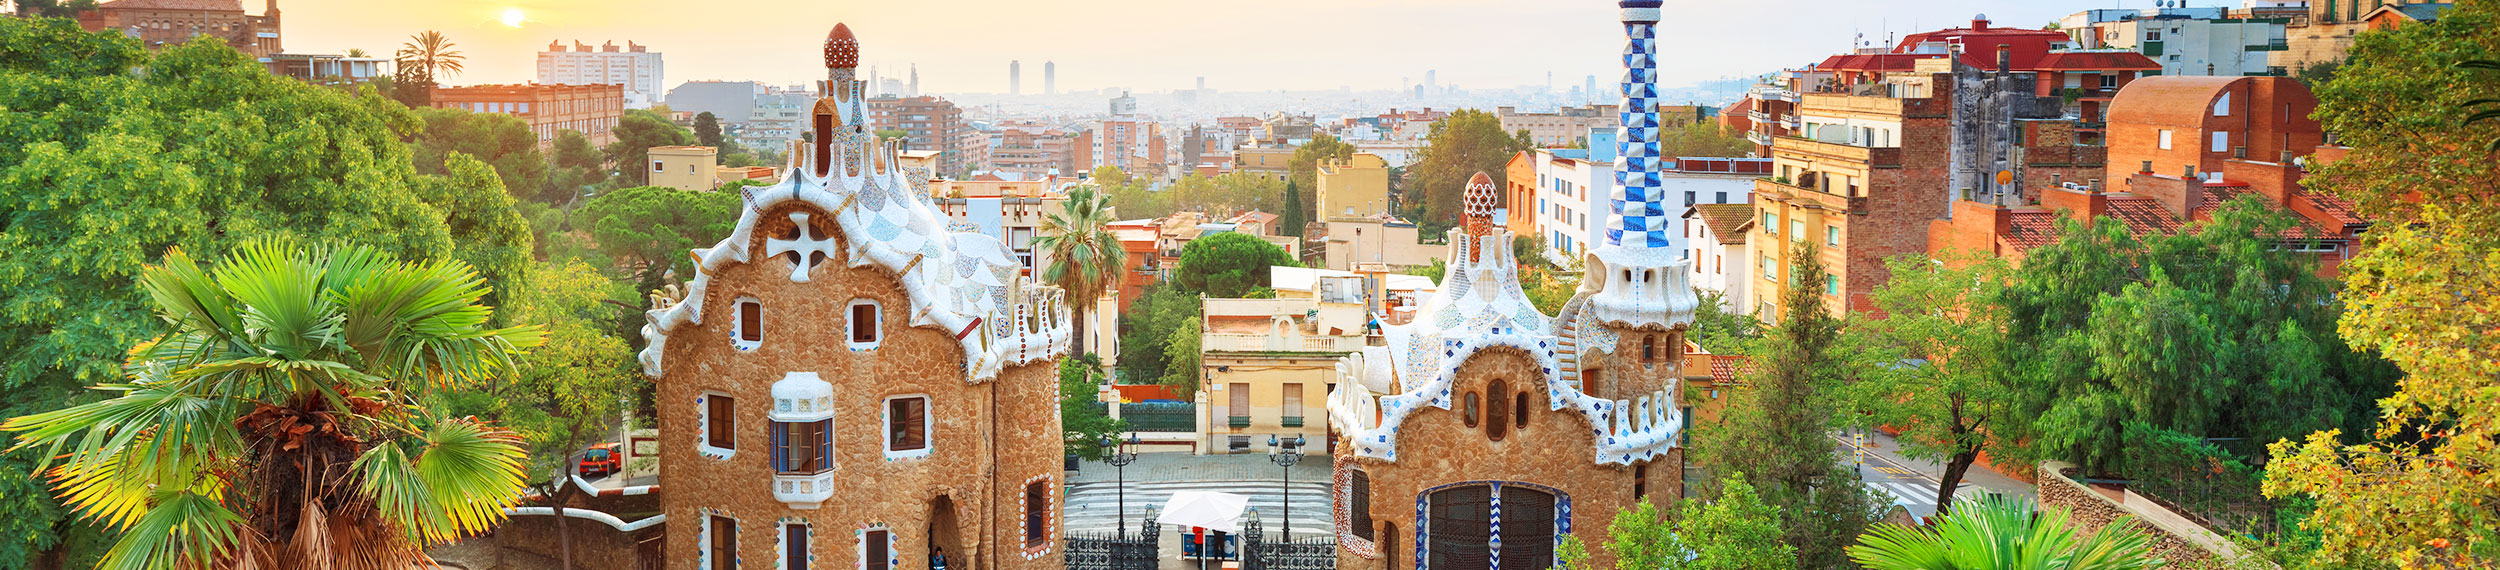 Panoramic view of Park Guell in Barcelona, Spain.